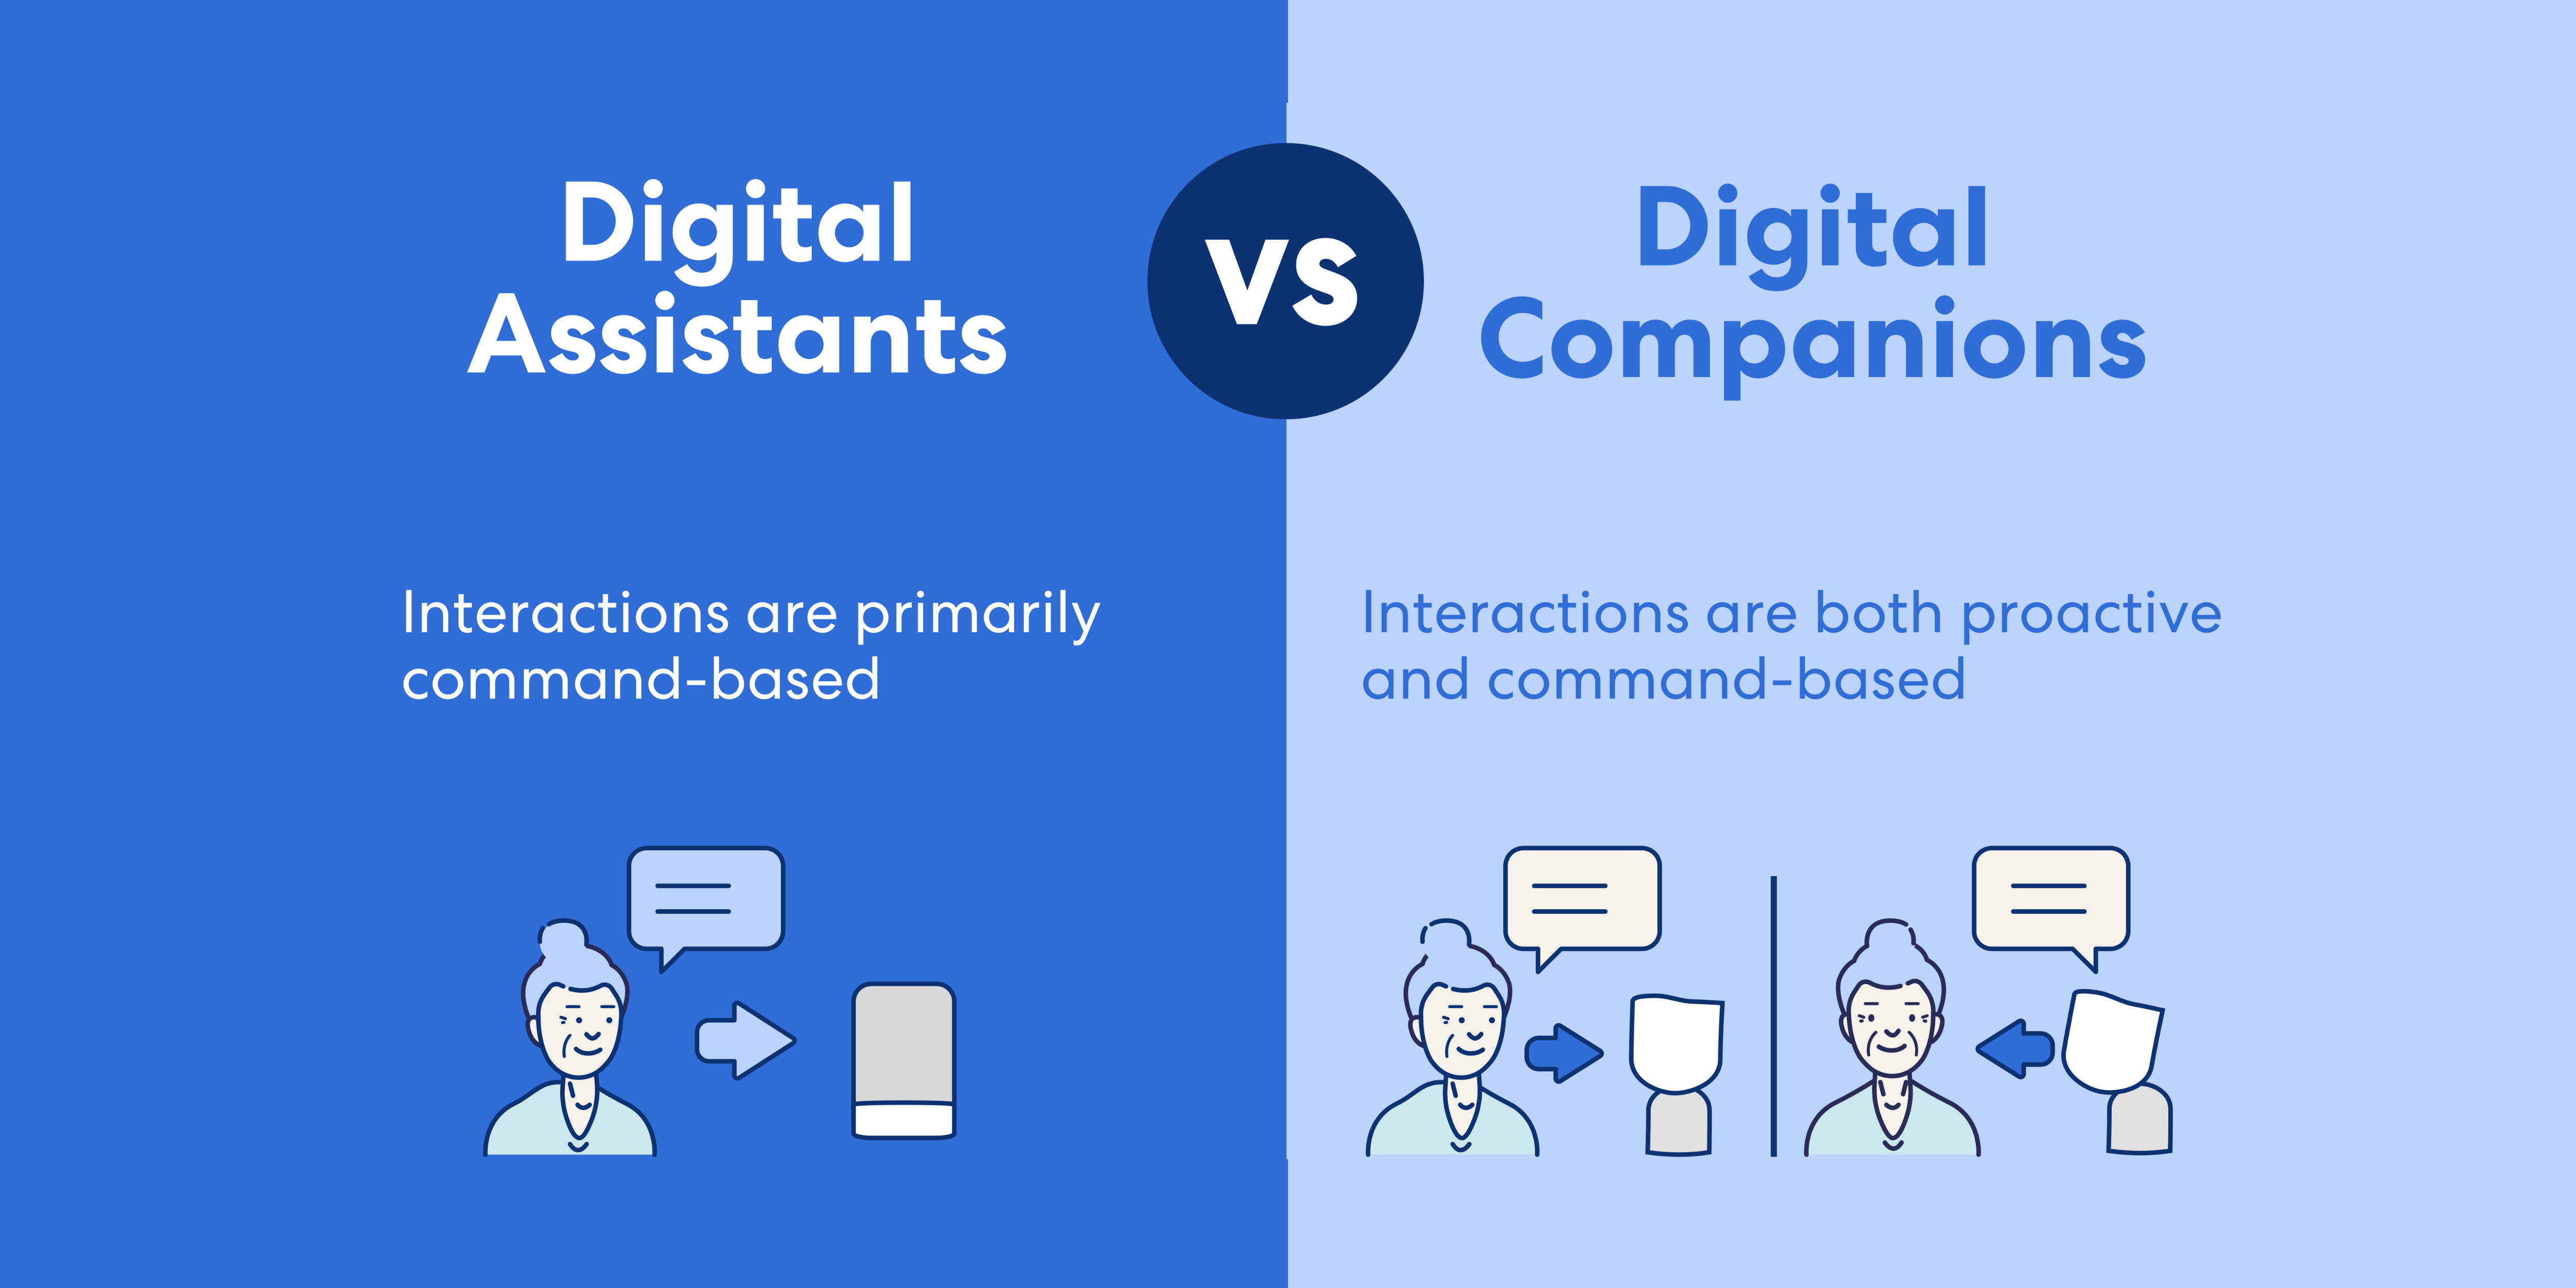 Digital Assistants vs Digital Companions: What's the Difference?